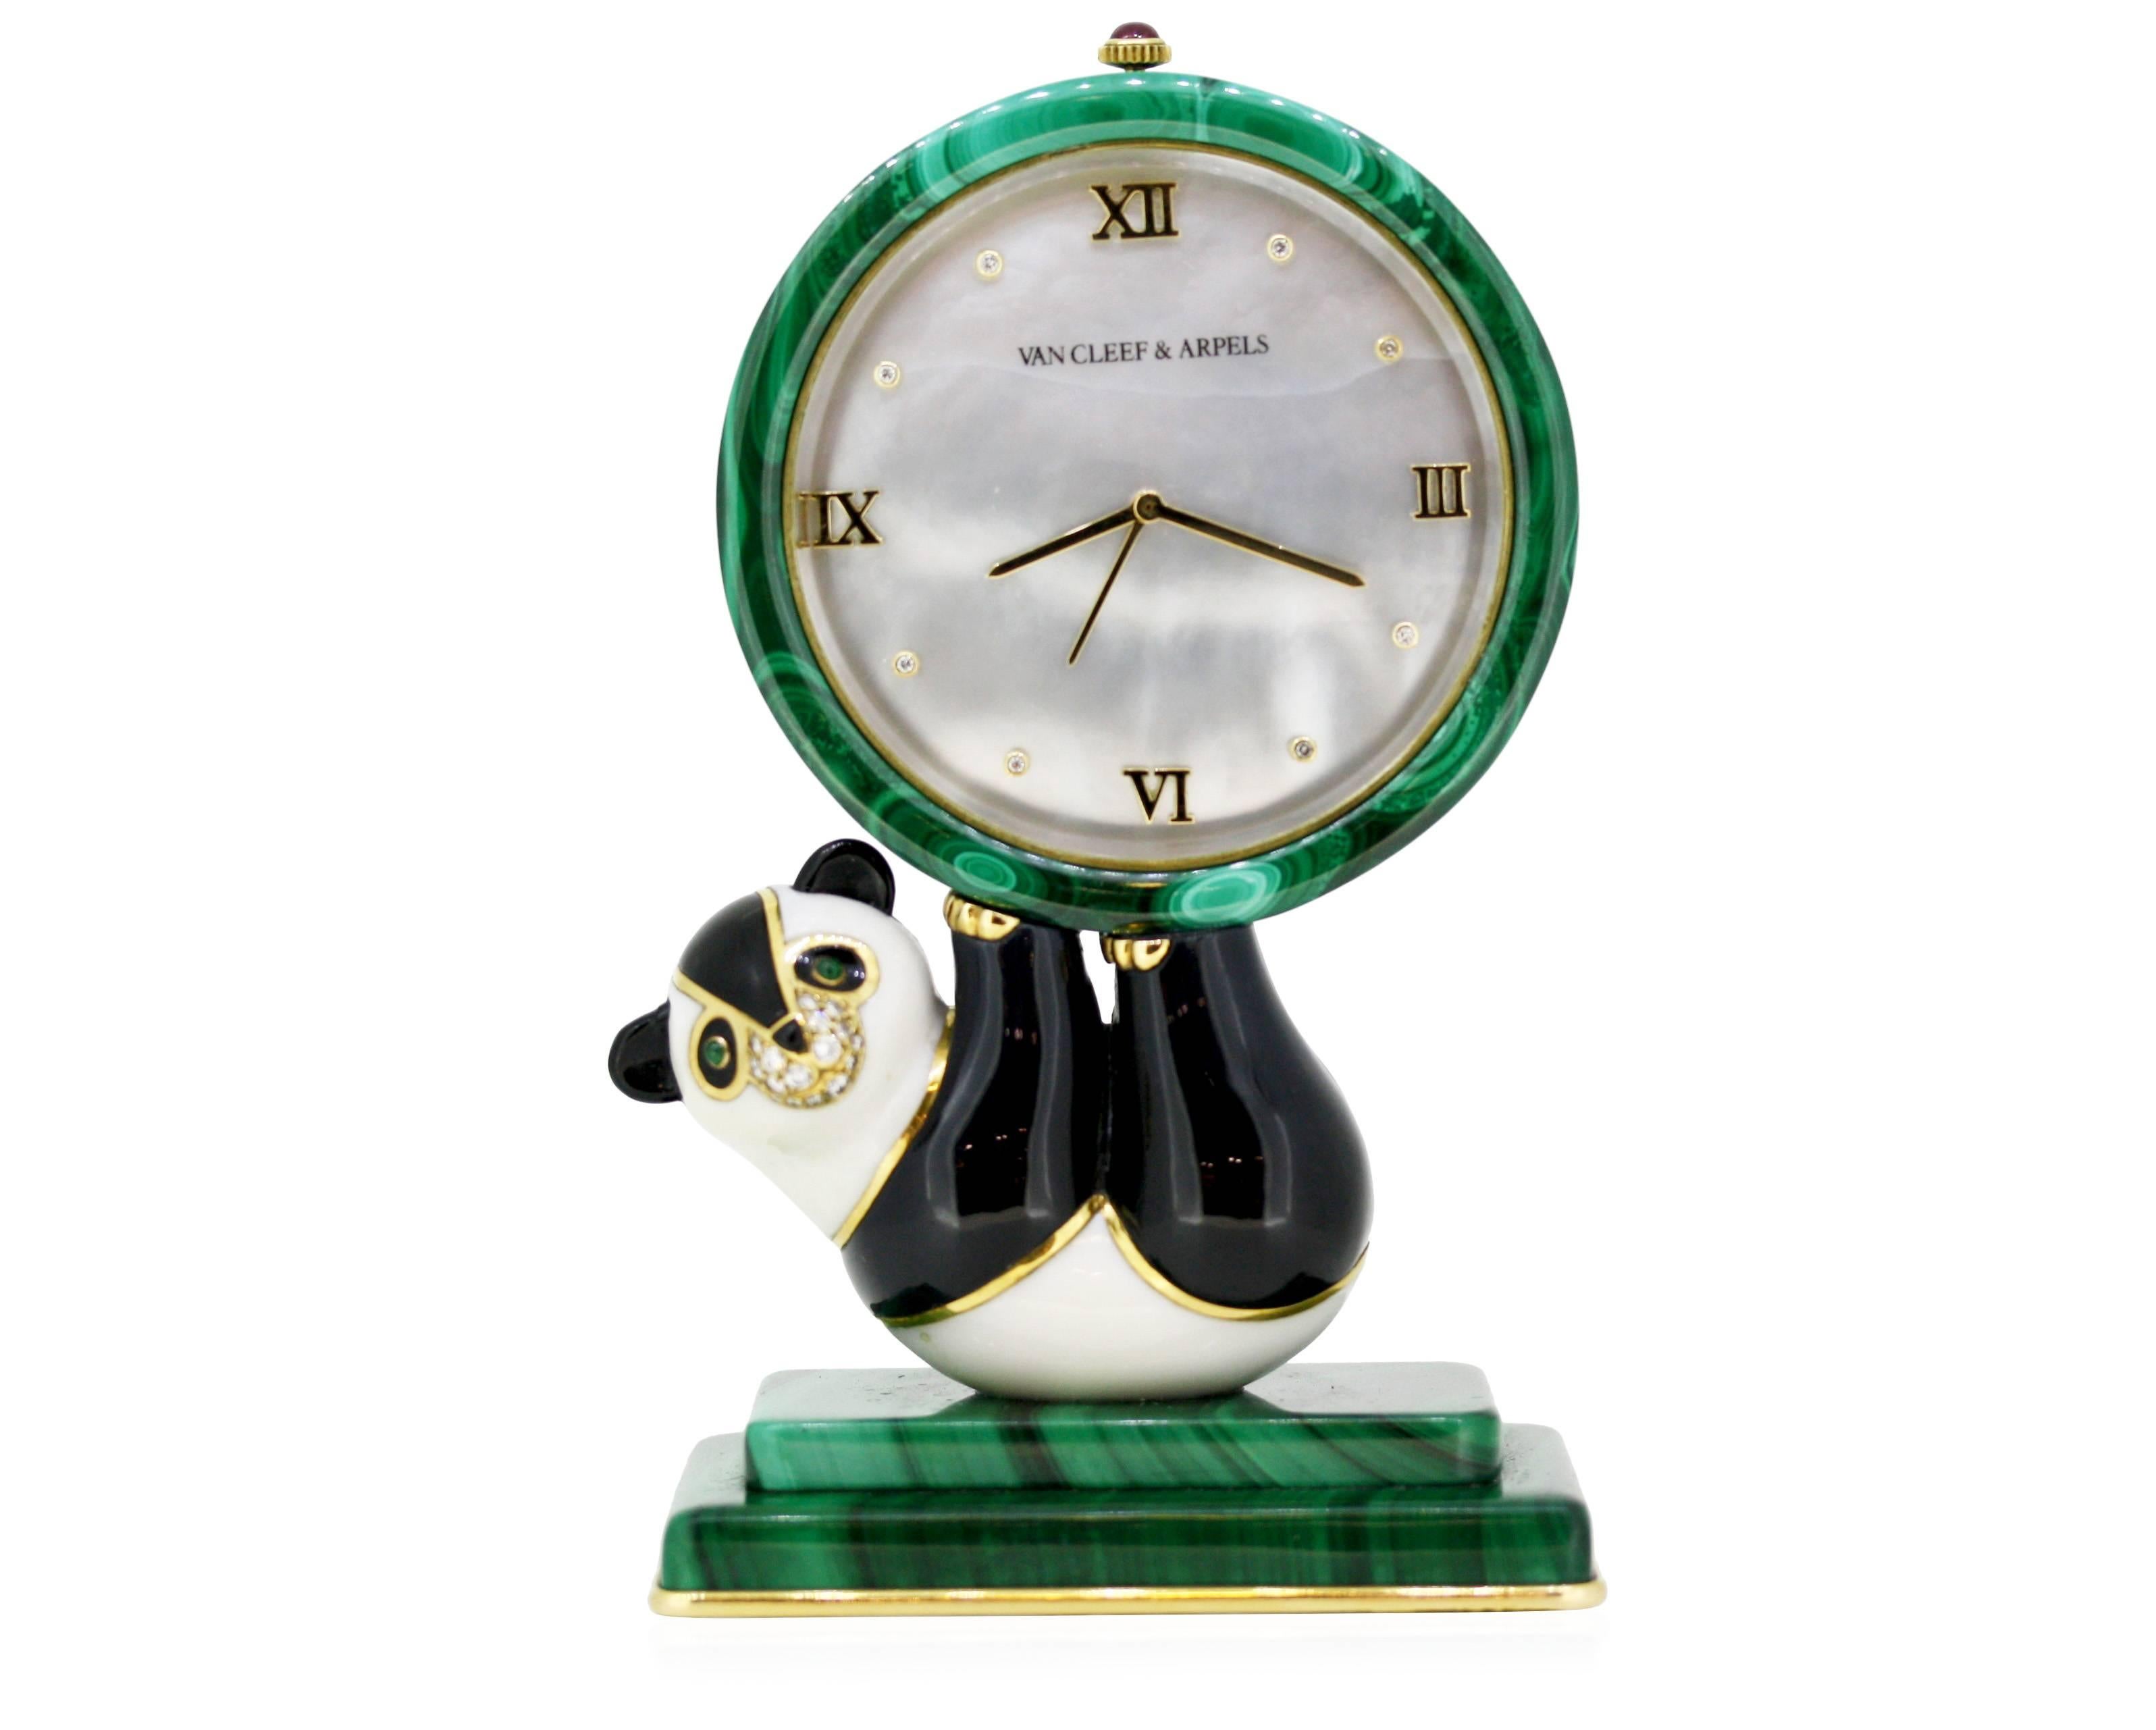 The playful panda formed of onyx and white hardstone with cabochon emerald eyes and pavé-set diamond muzzle, lying on his back while balancing a 'ball' featuring a mother-of-pearl dial and gilt Roman numerals alternating with single-cut diamonds